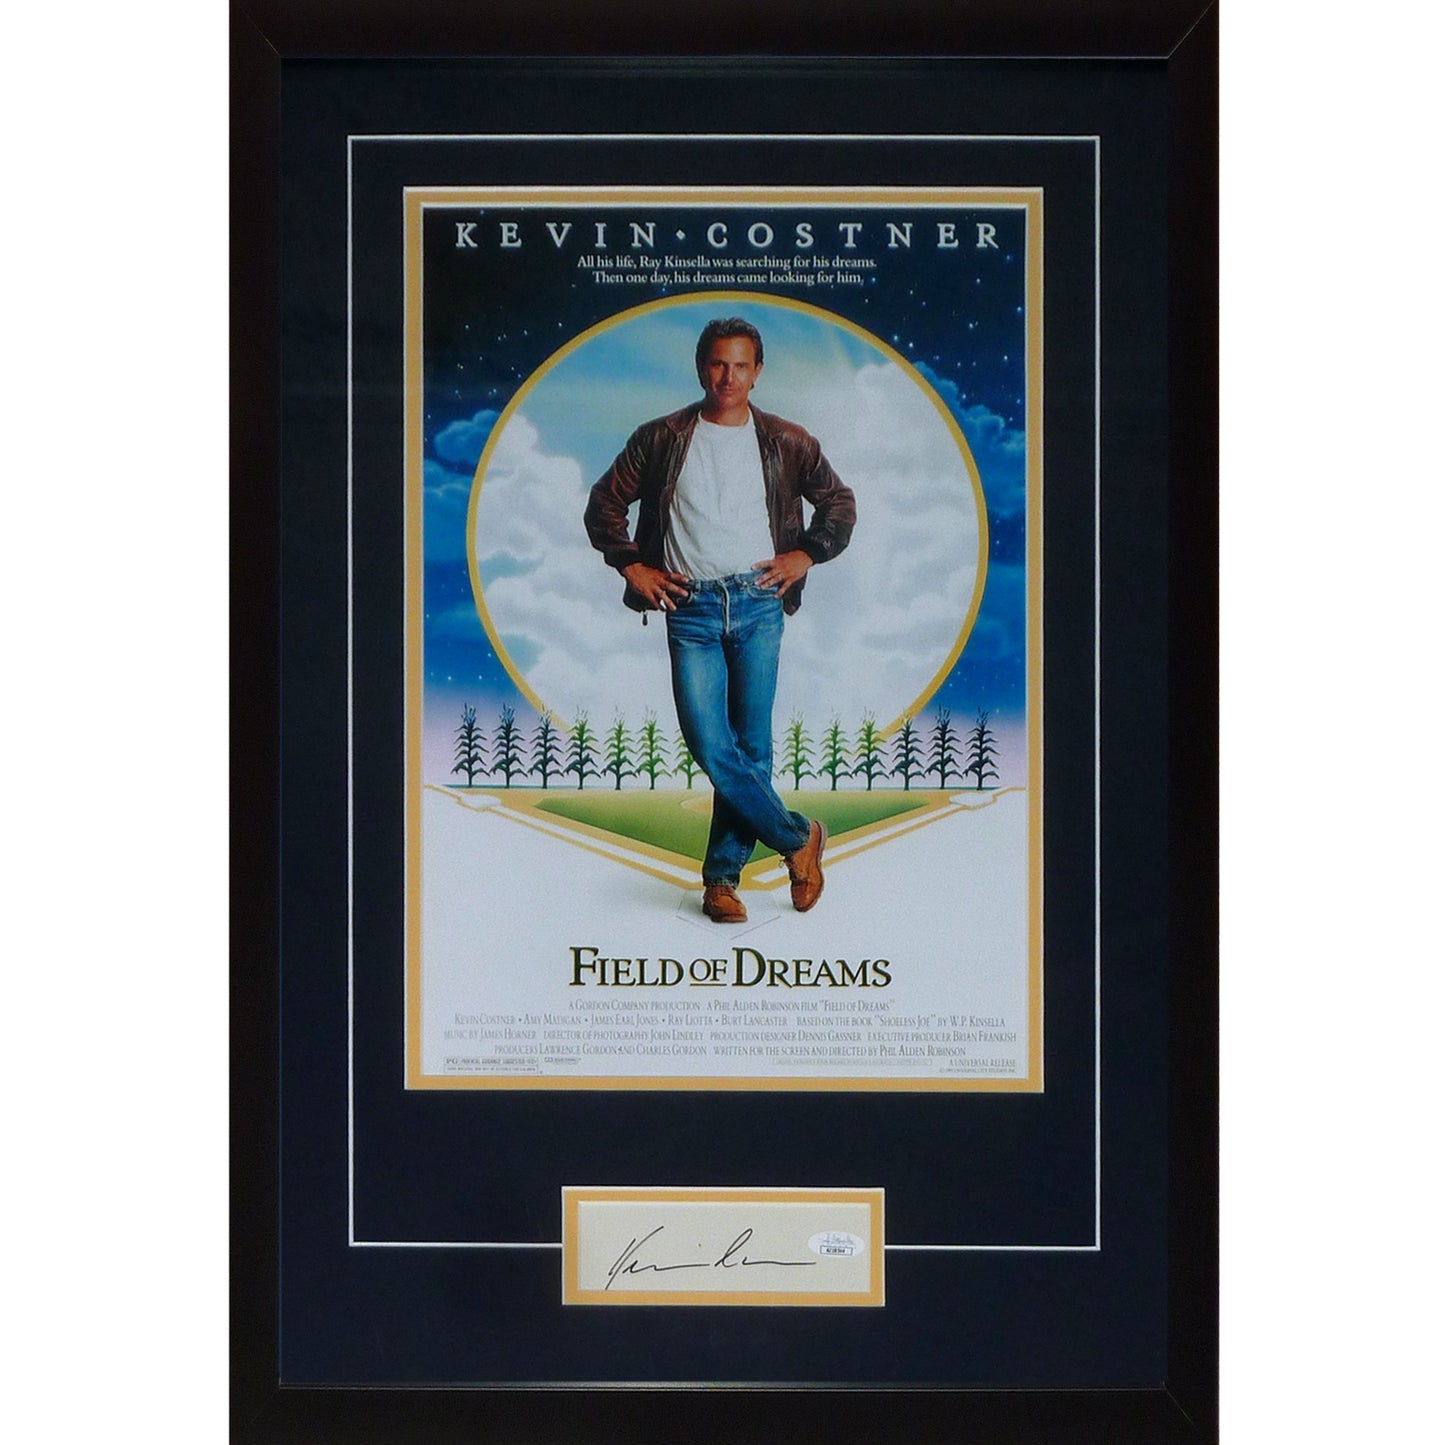 Field of Dreams 11x17 Movie Poster Deluxe Framed with Kevin Costner Autograph - JSA